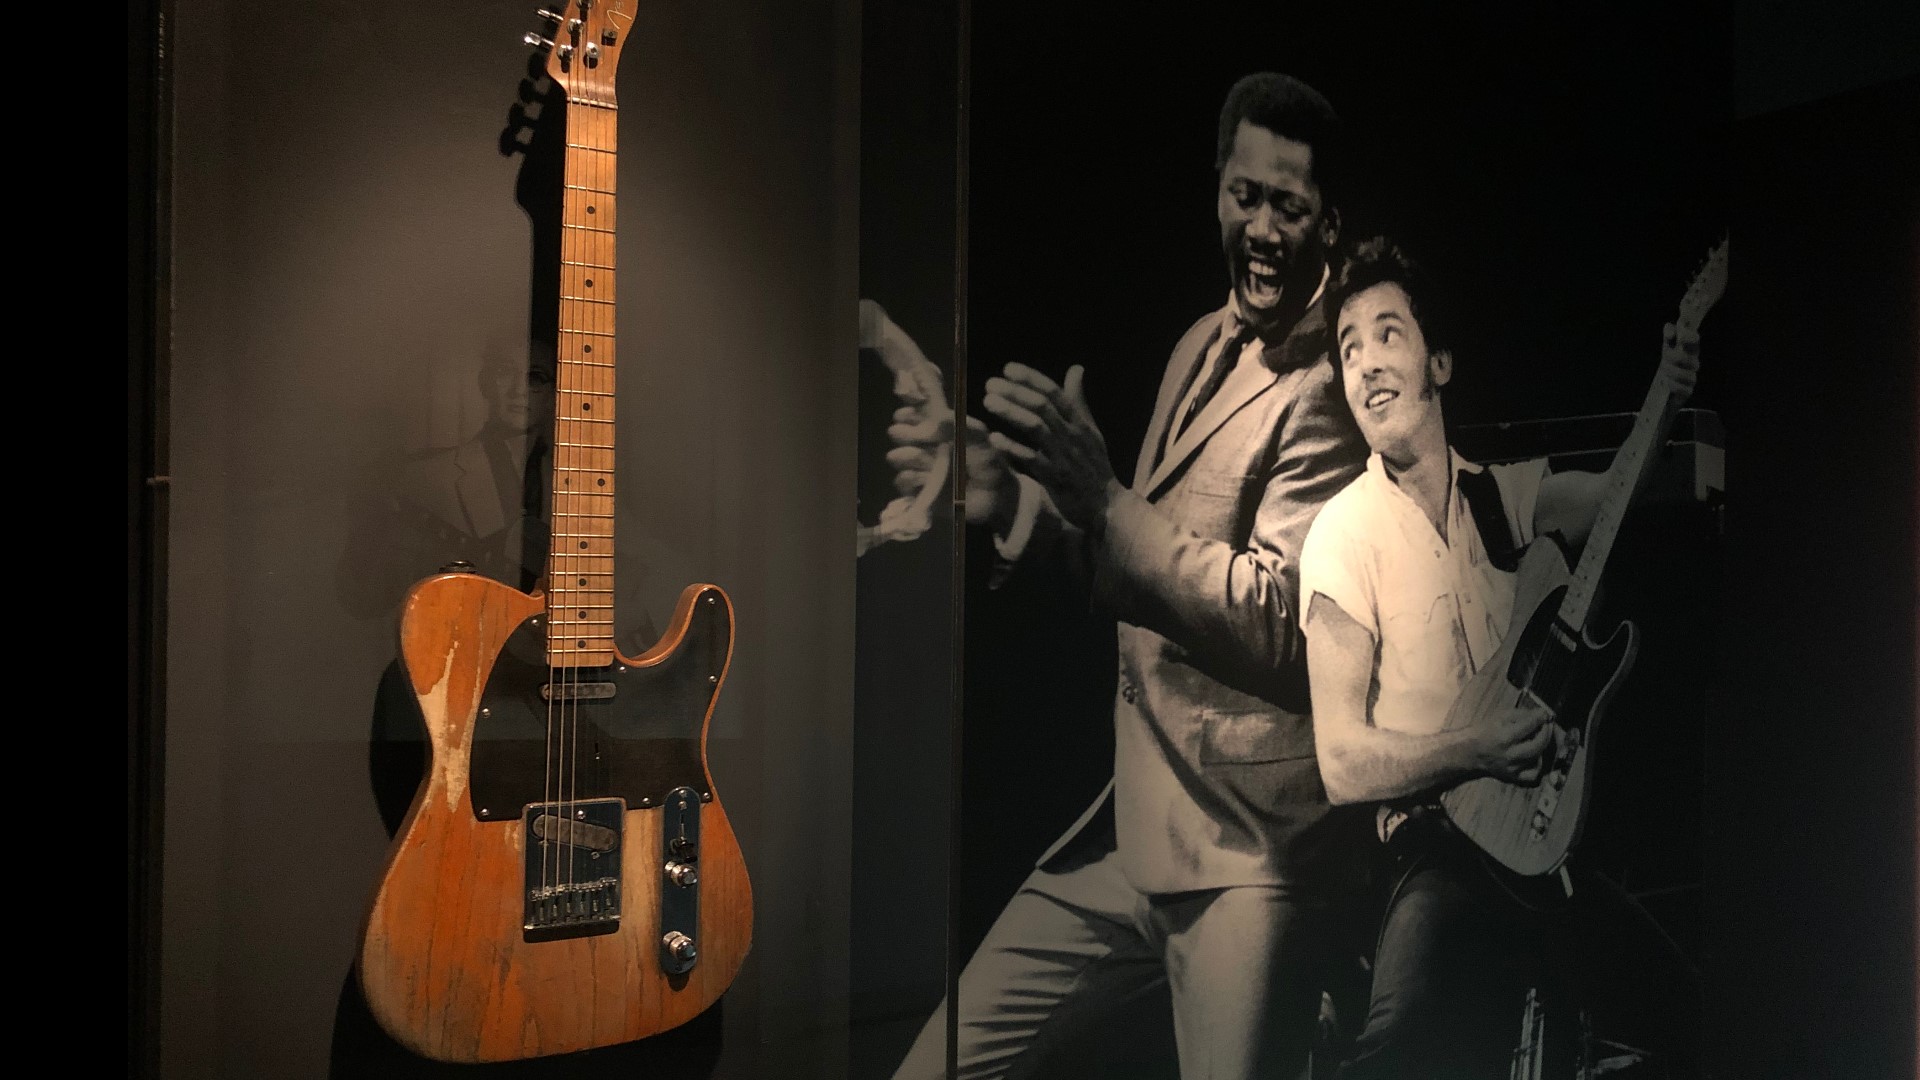 Get a sneak peek at the largest exhibit the Rock and Roll Hall of Fame has ever put together